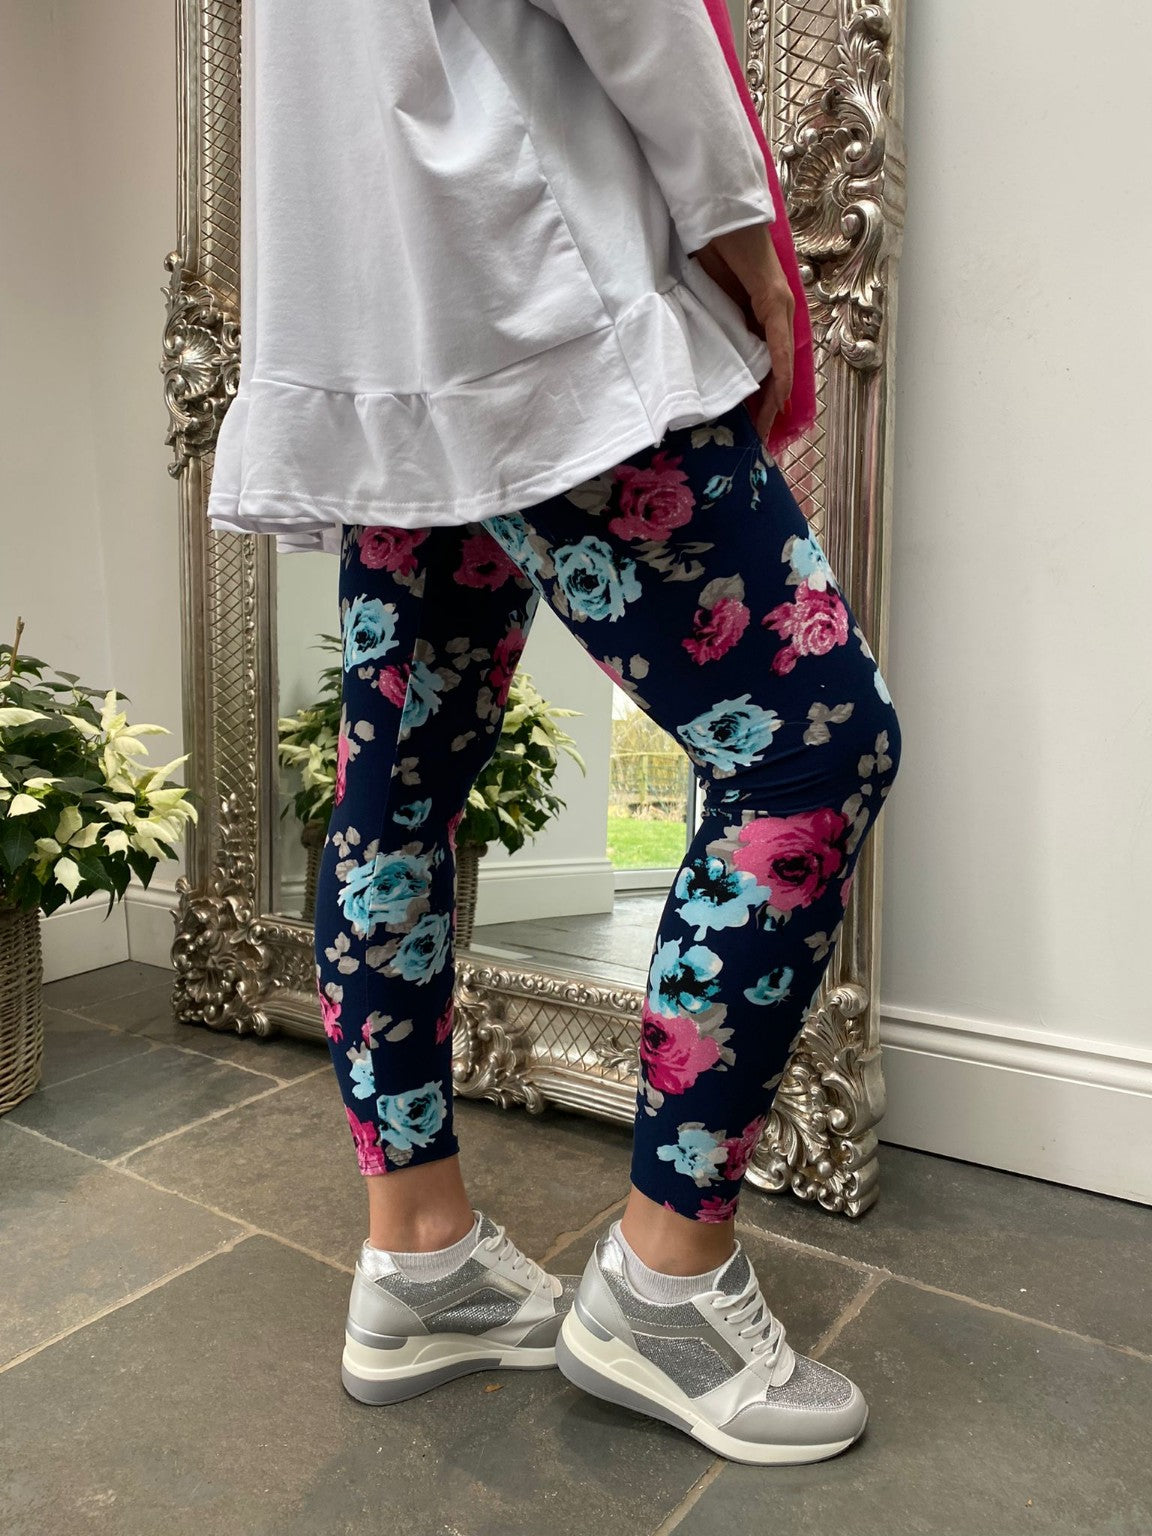 Allover Floral Print Flare Leg Pants | Flare leg pants, Floral flare,  Photoshoot outfits